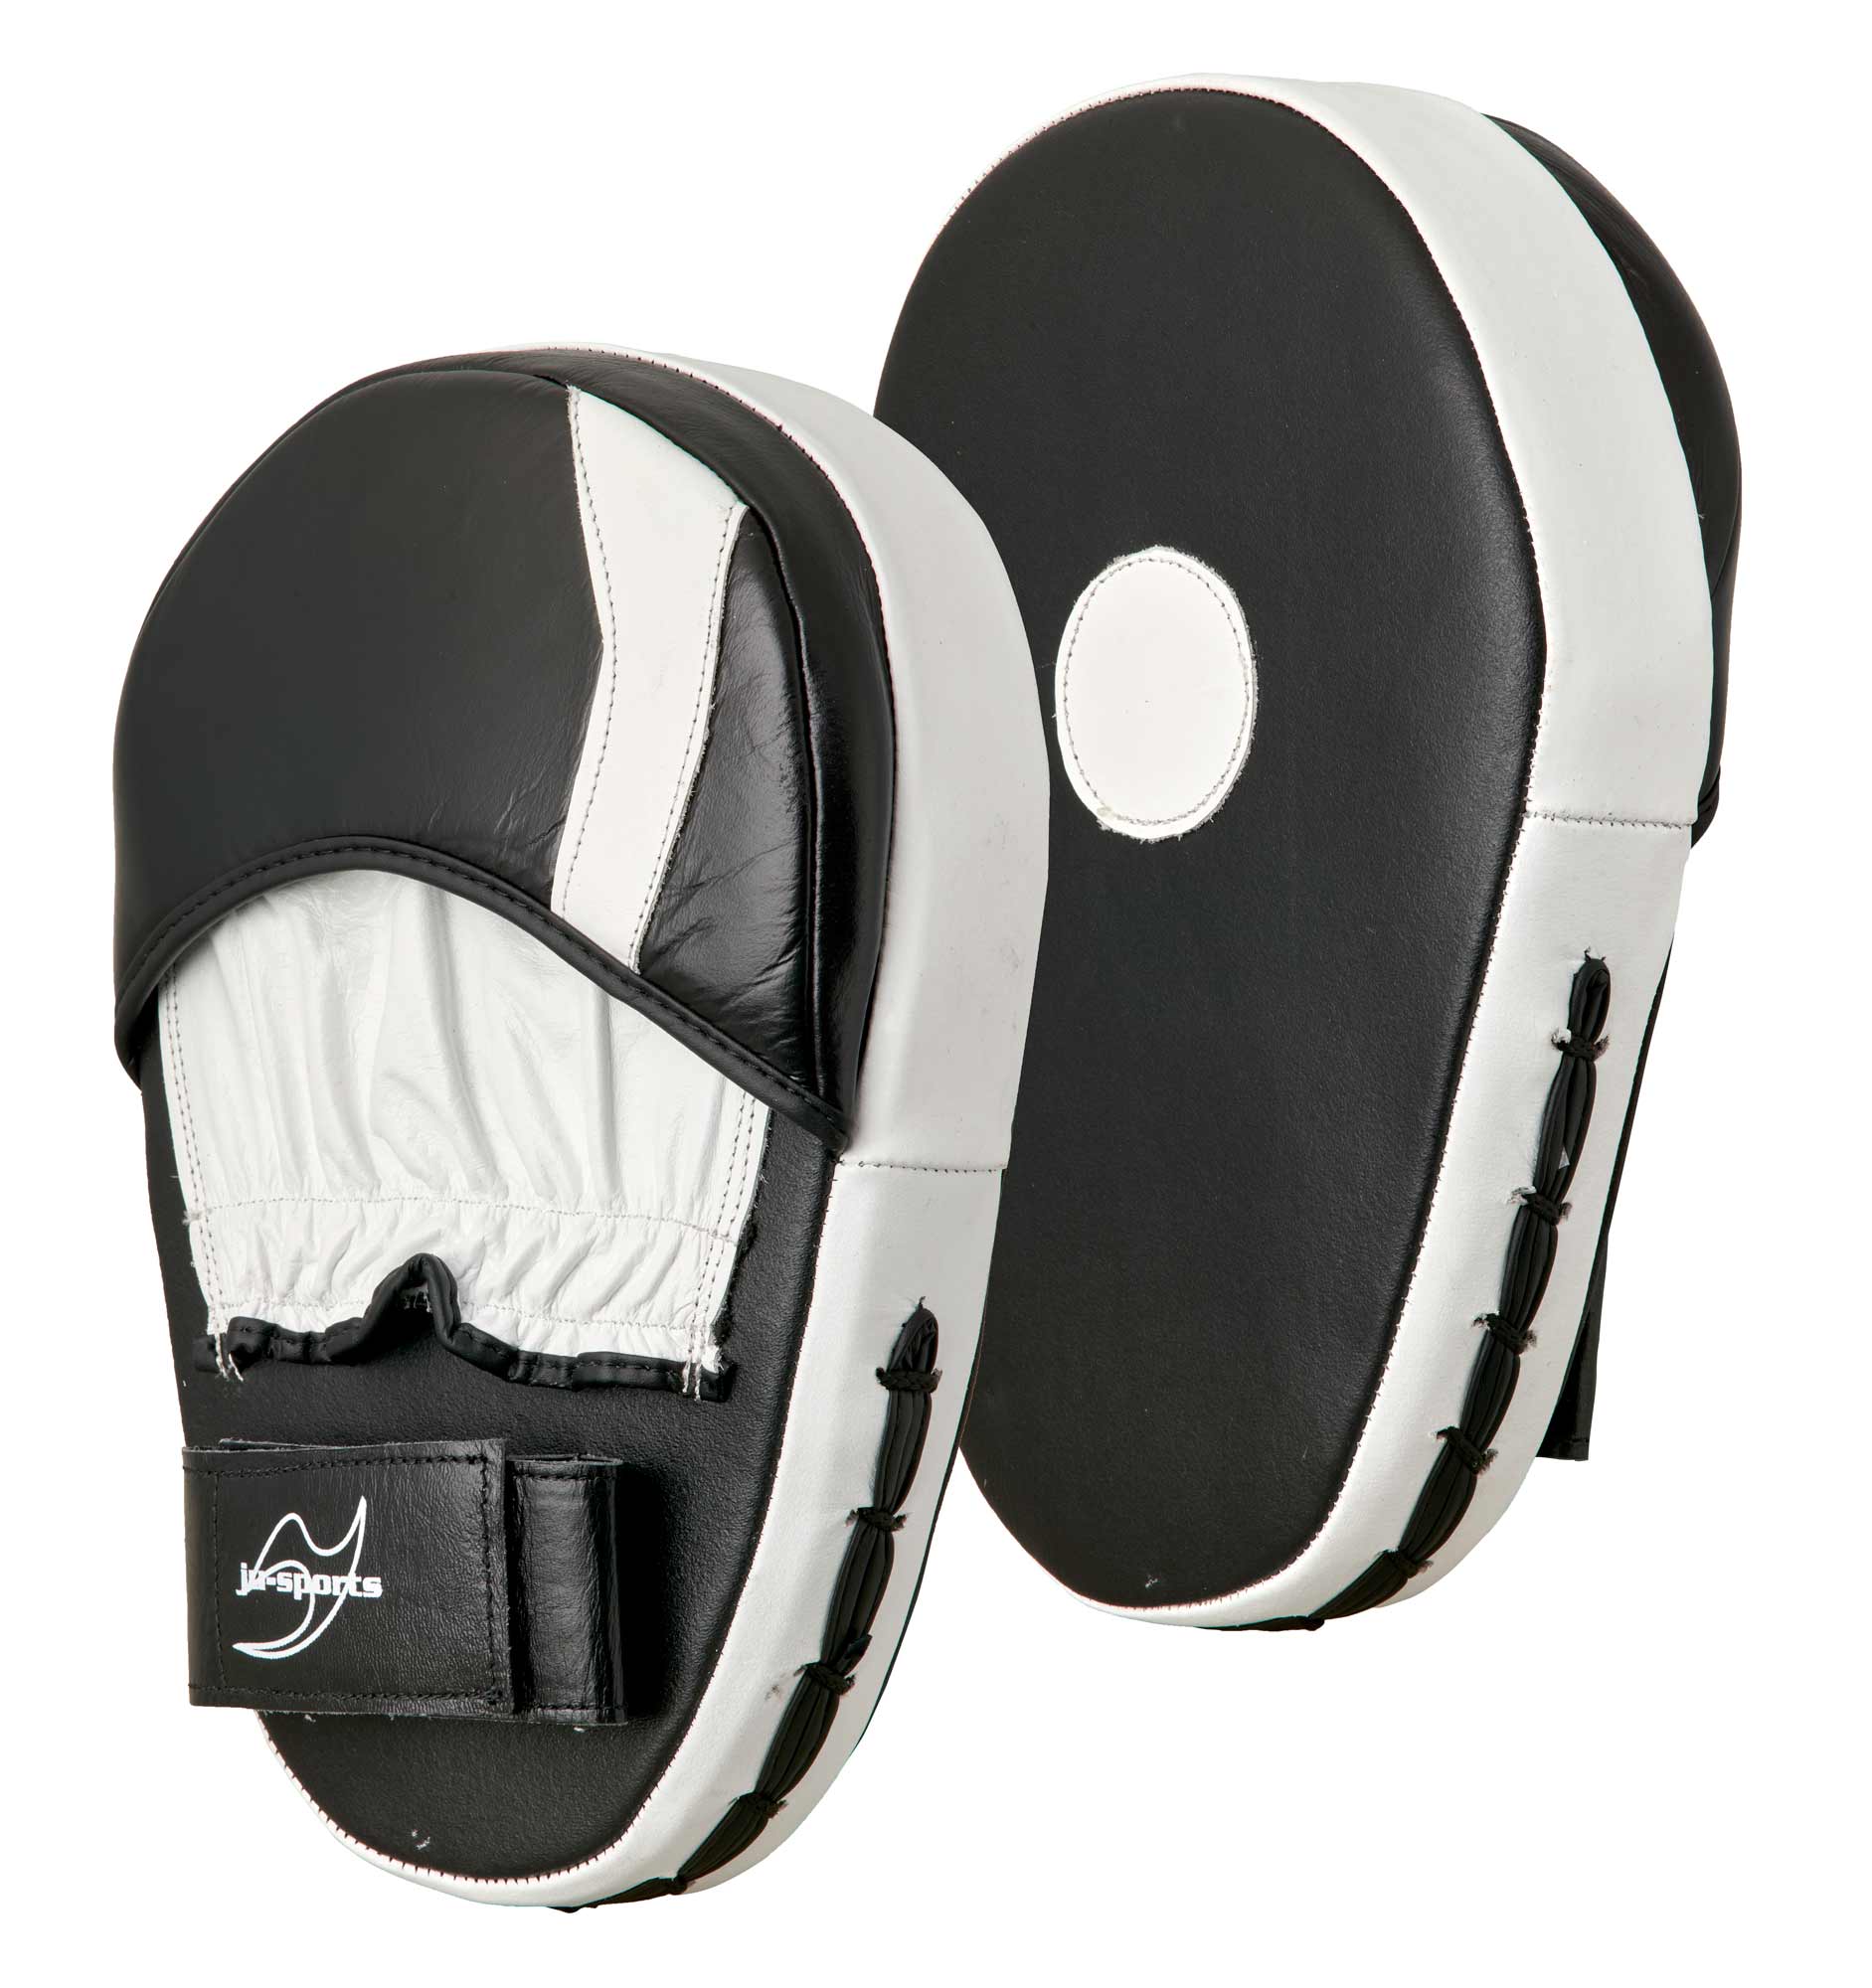 Ju-Sports Focus Mitts Leather